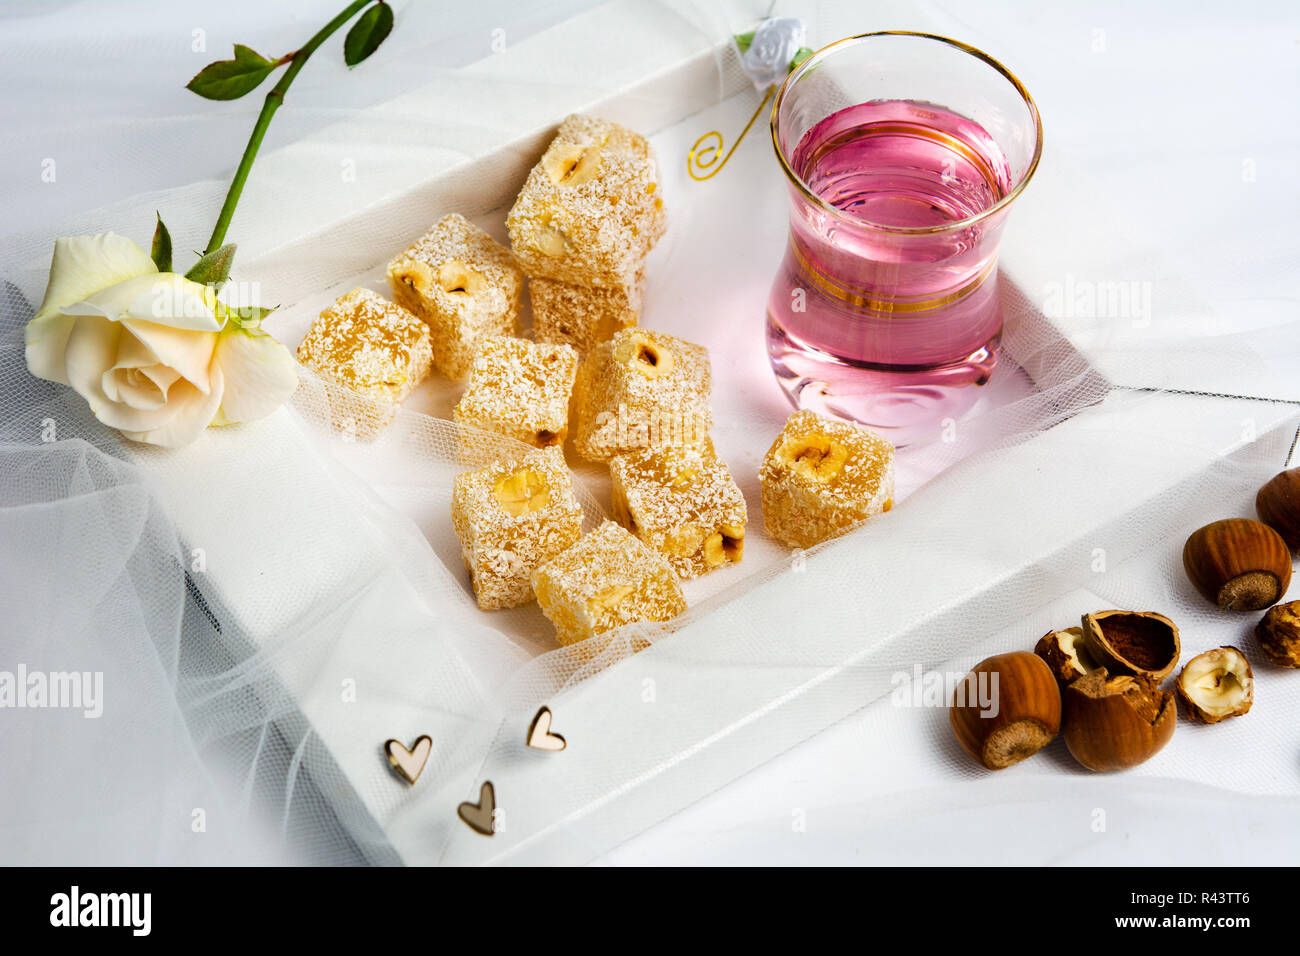 Turkish delight dessert with hazelnut and rose tea top view Stock Photo